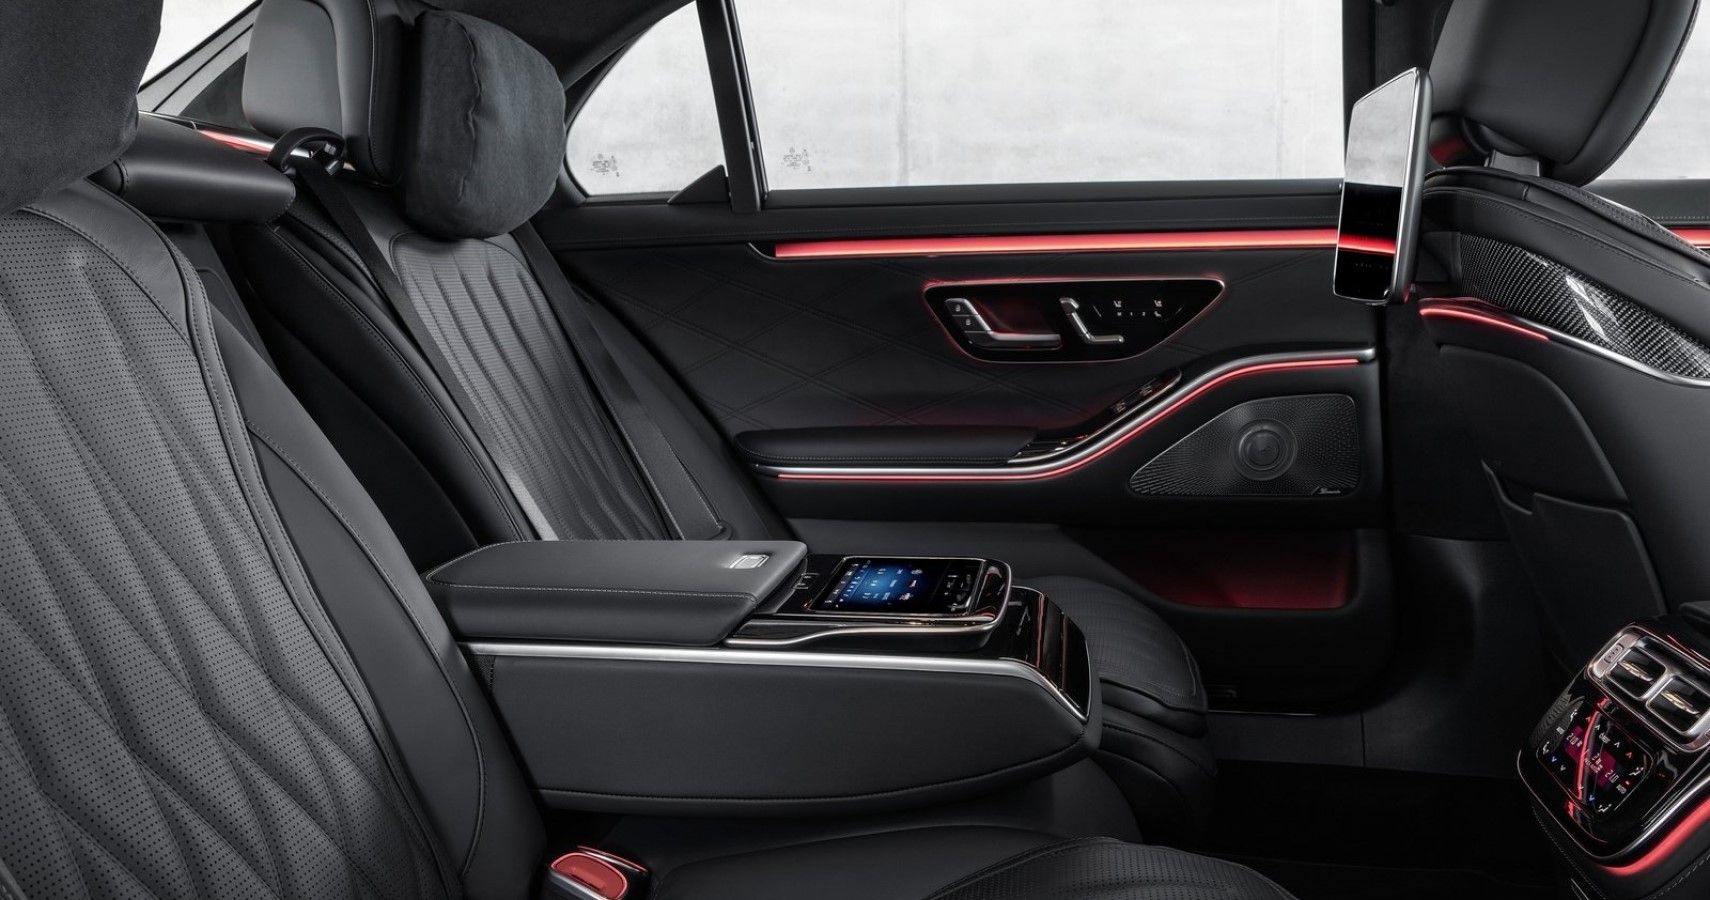 Mercedes-Benz S63 AMG E Performance second row seating view